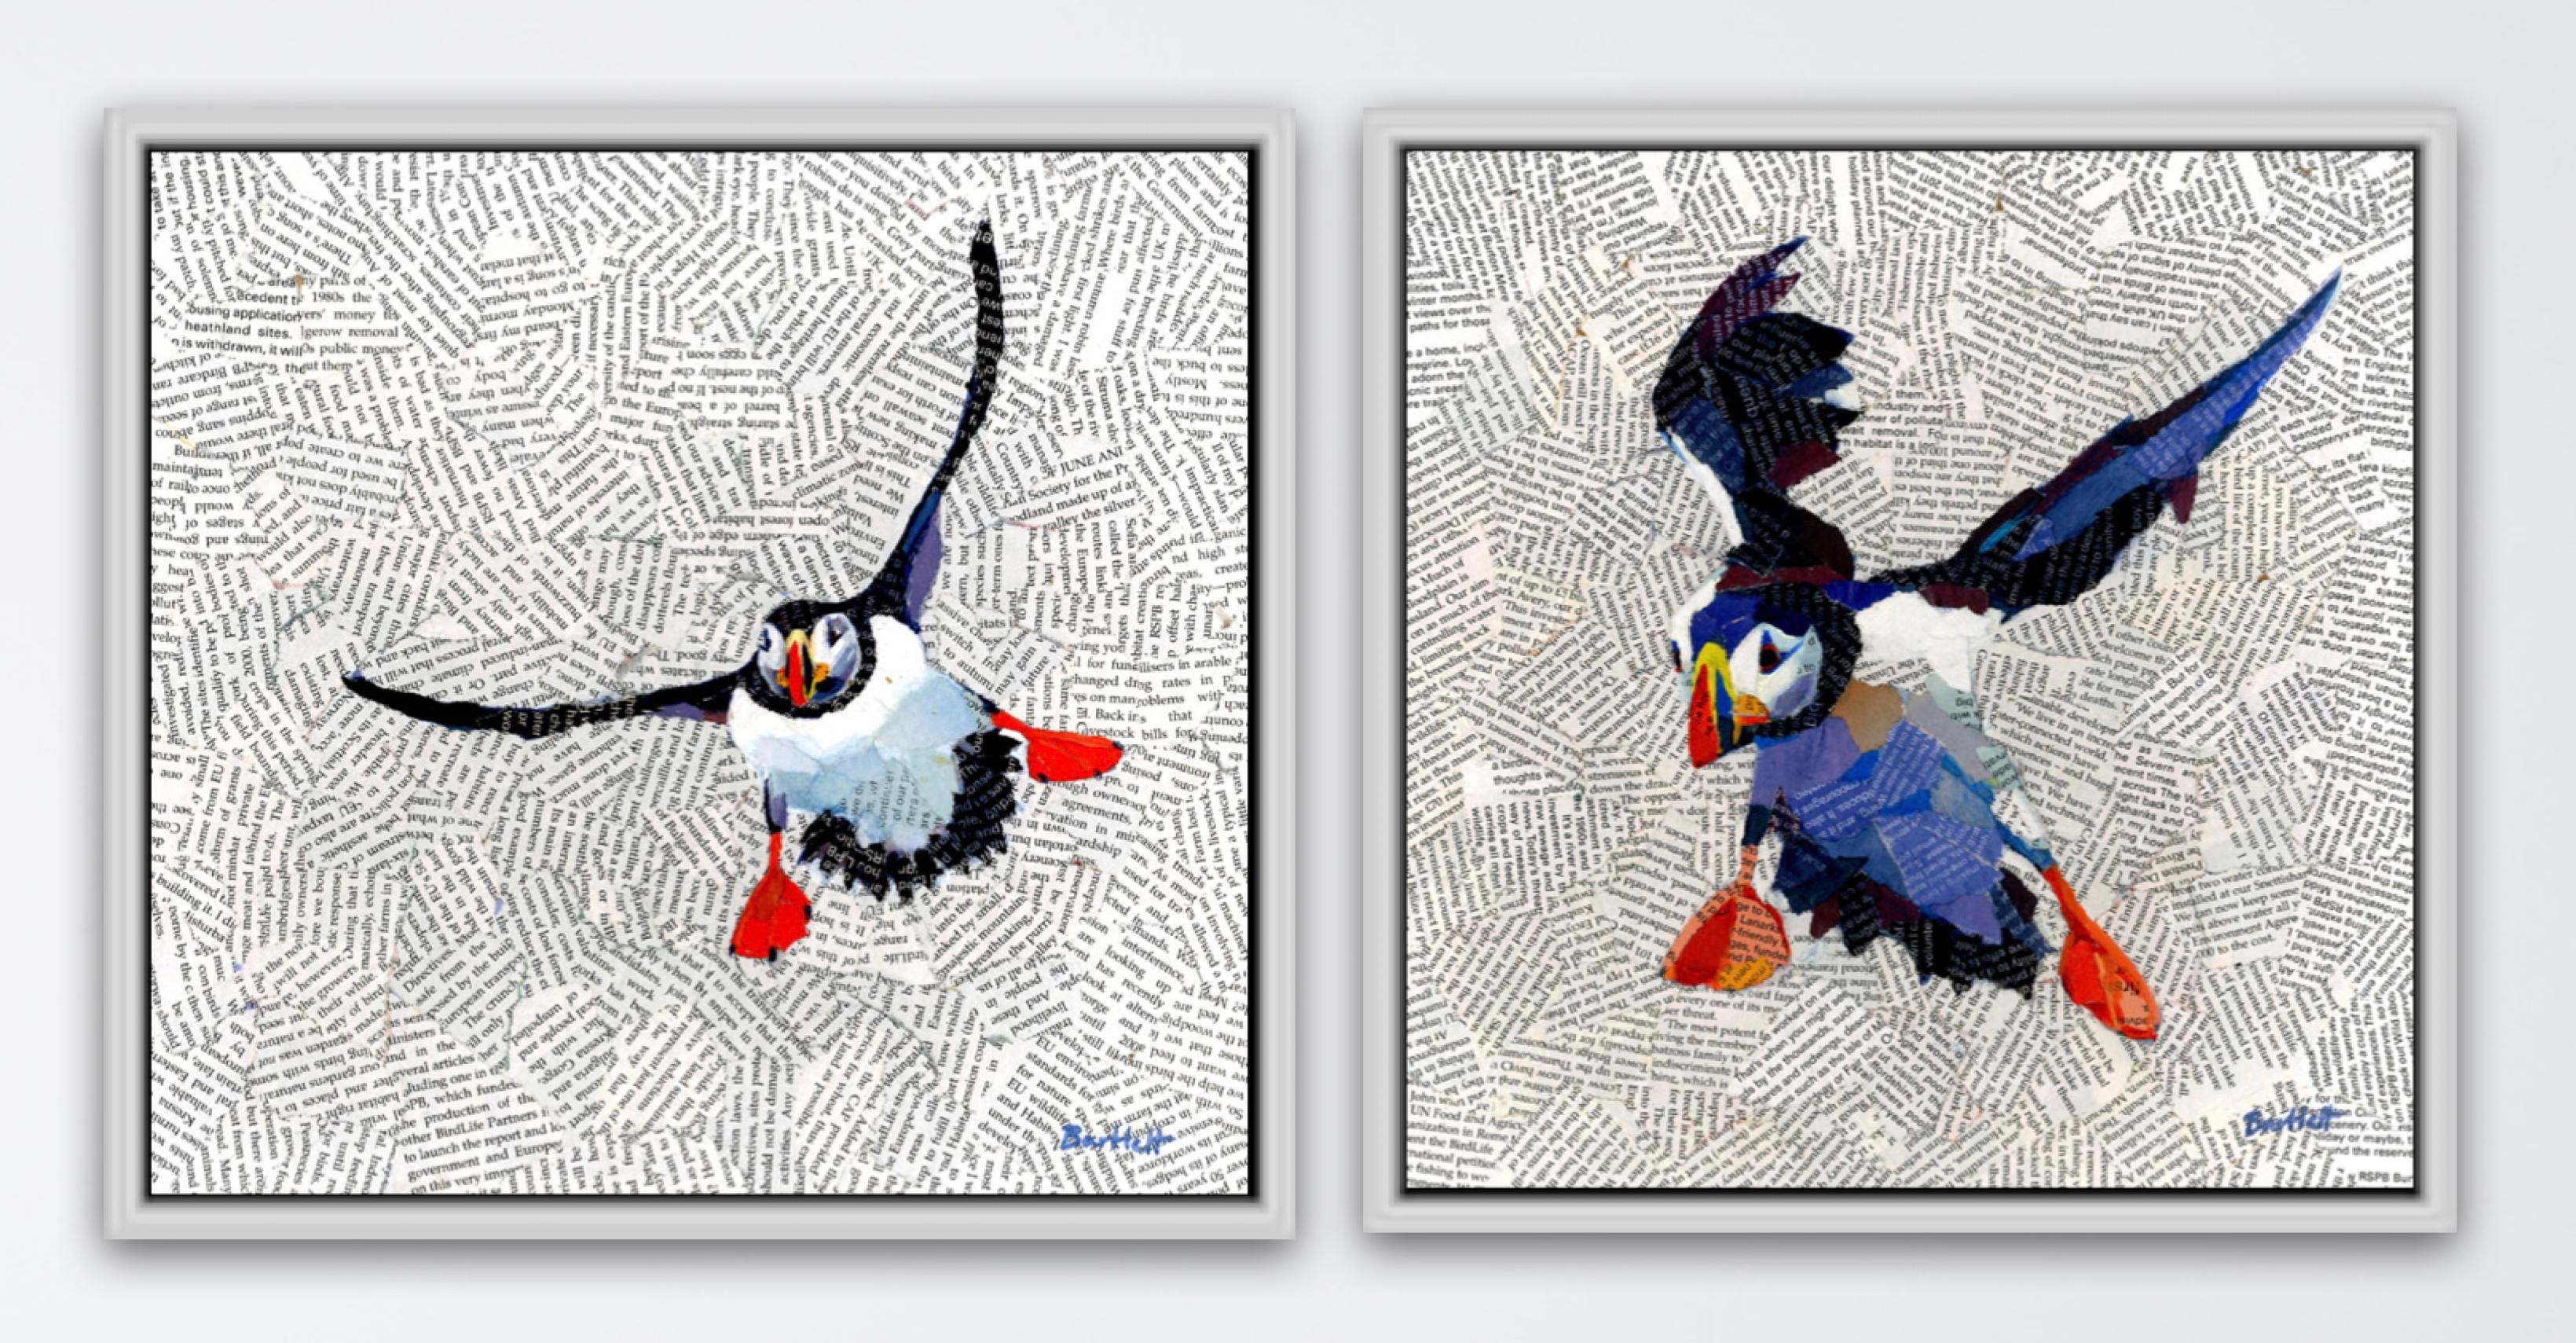 Paul Bartlett Animal Print - Puffin landing and The Arrival